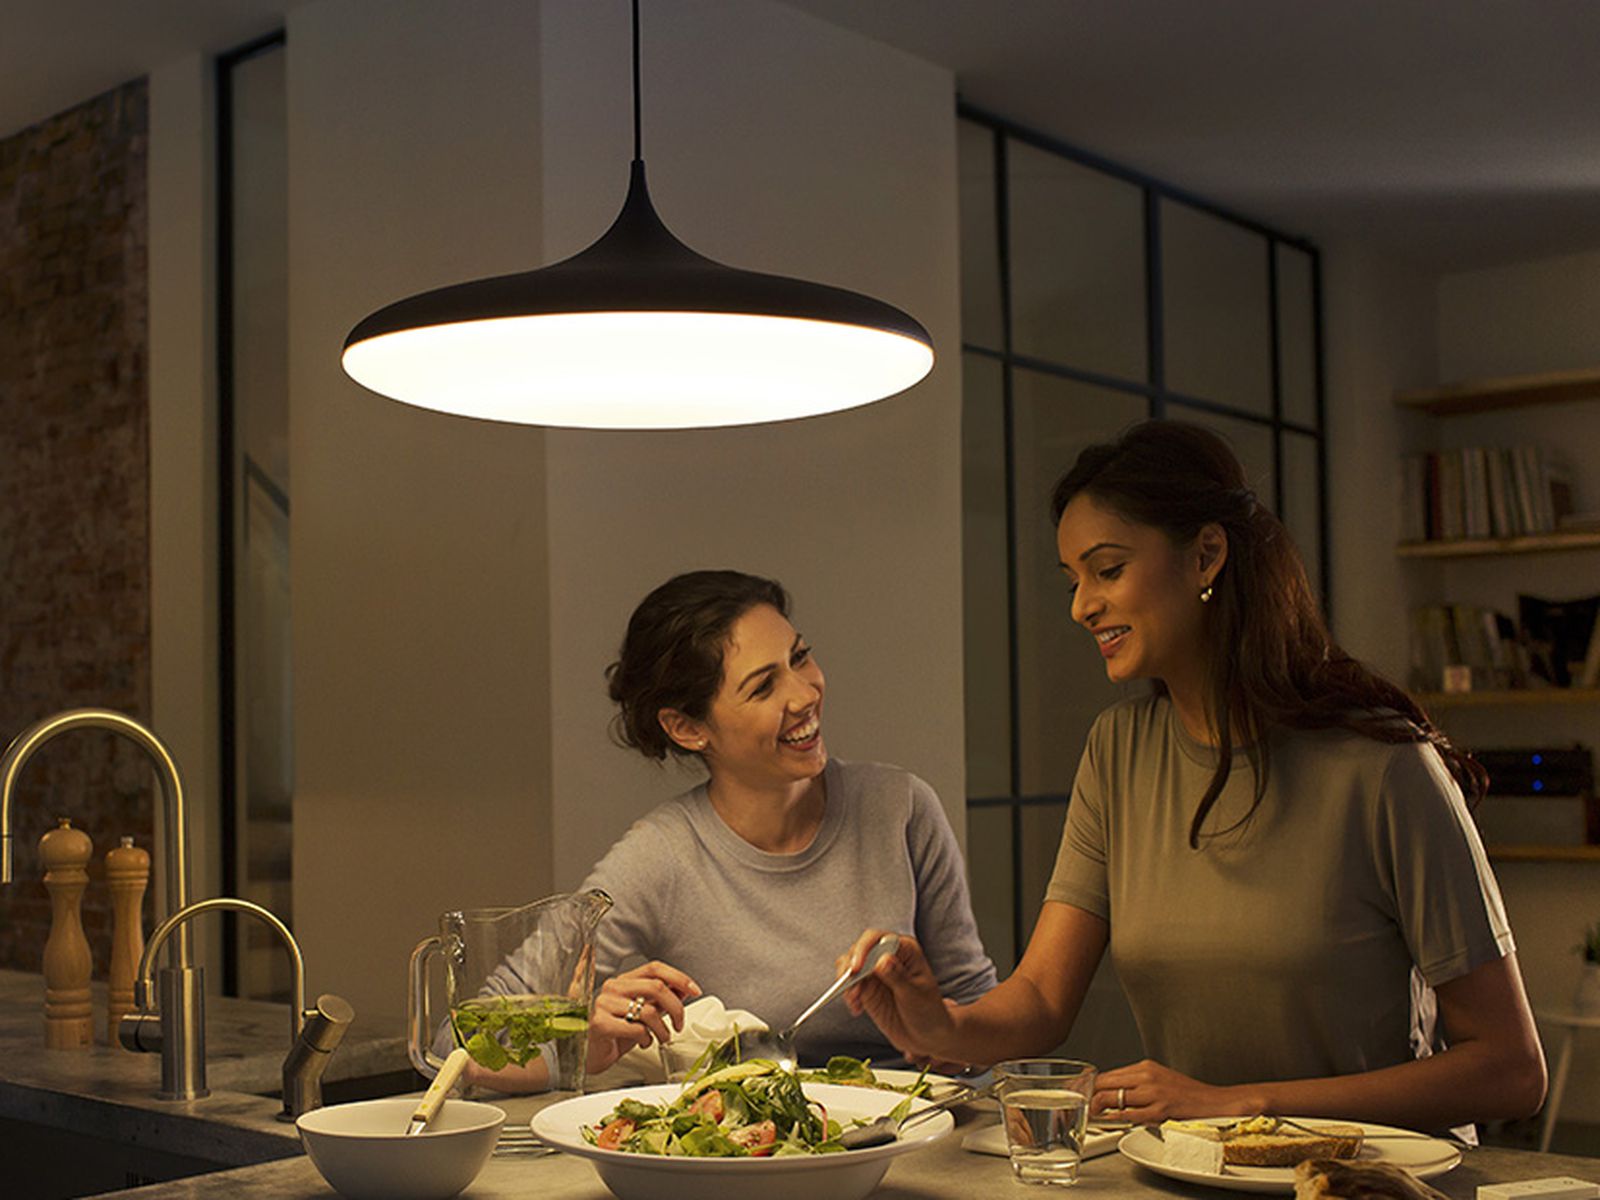 Natur fjendtlighed Muskuløs Philips Hue Announces New Light Fixtures and Expanded Starter Kits -  MacRumors